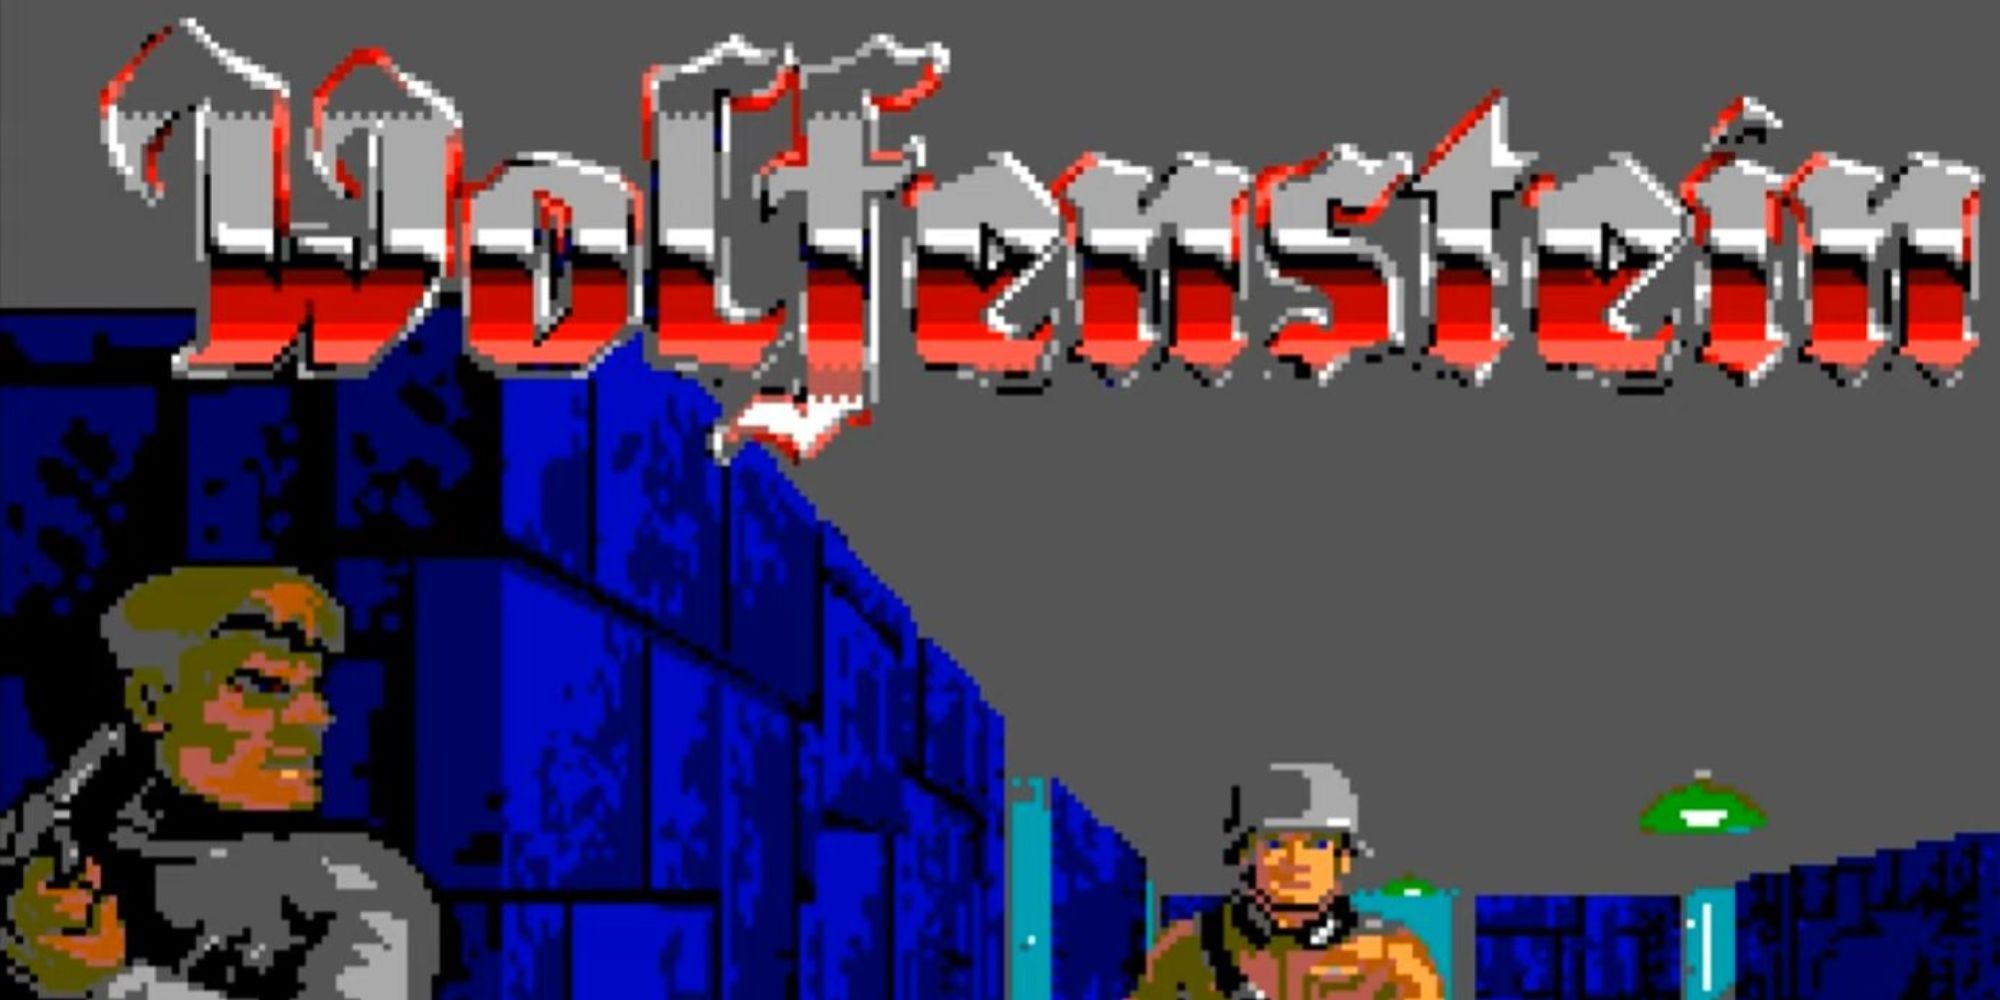 Menu screen for FPS game Wolfenstein 3-D from 1992 by id Software